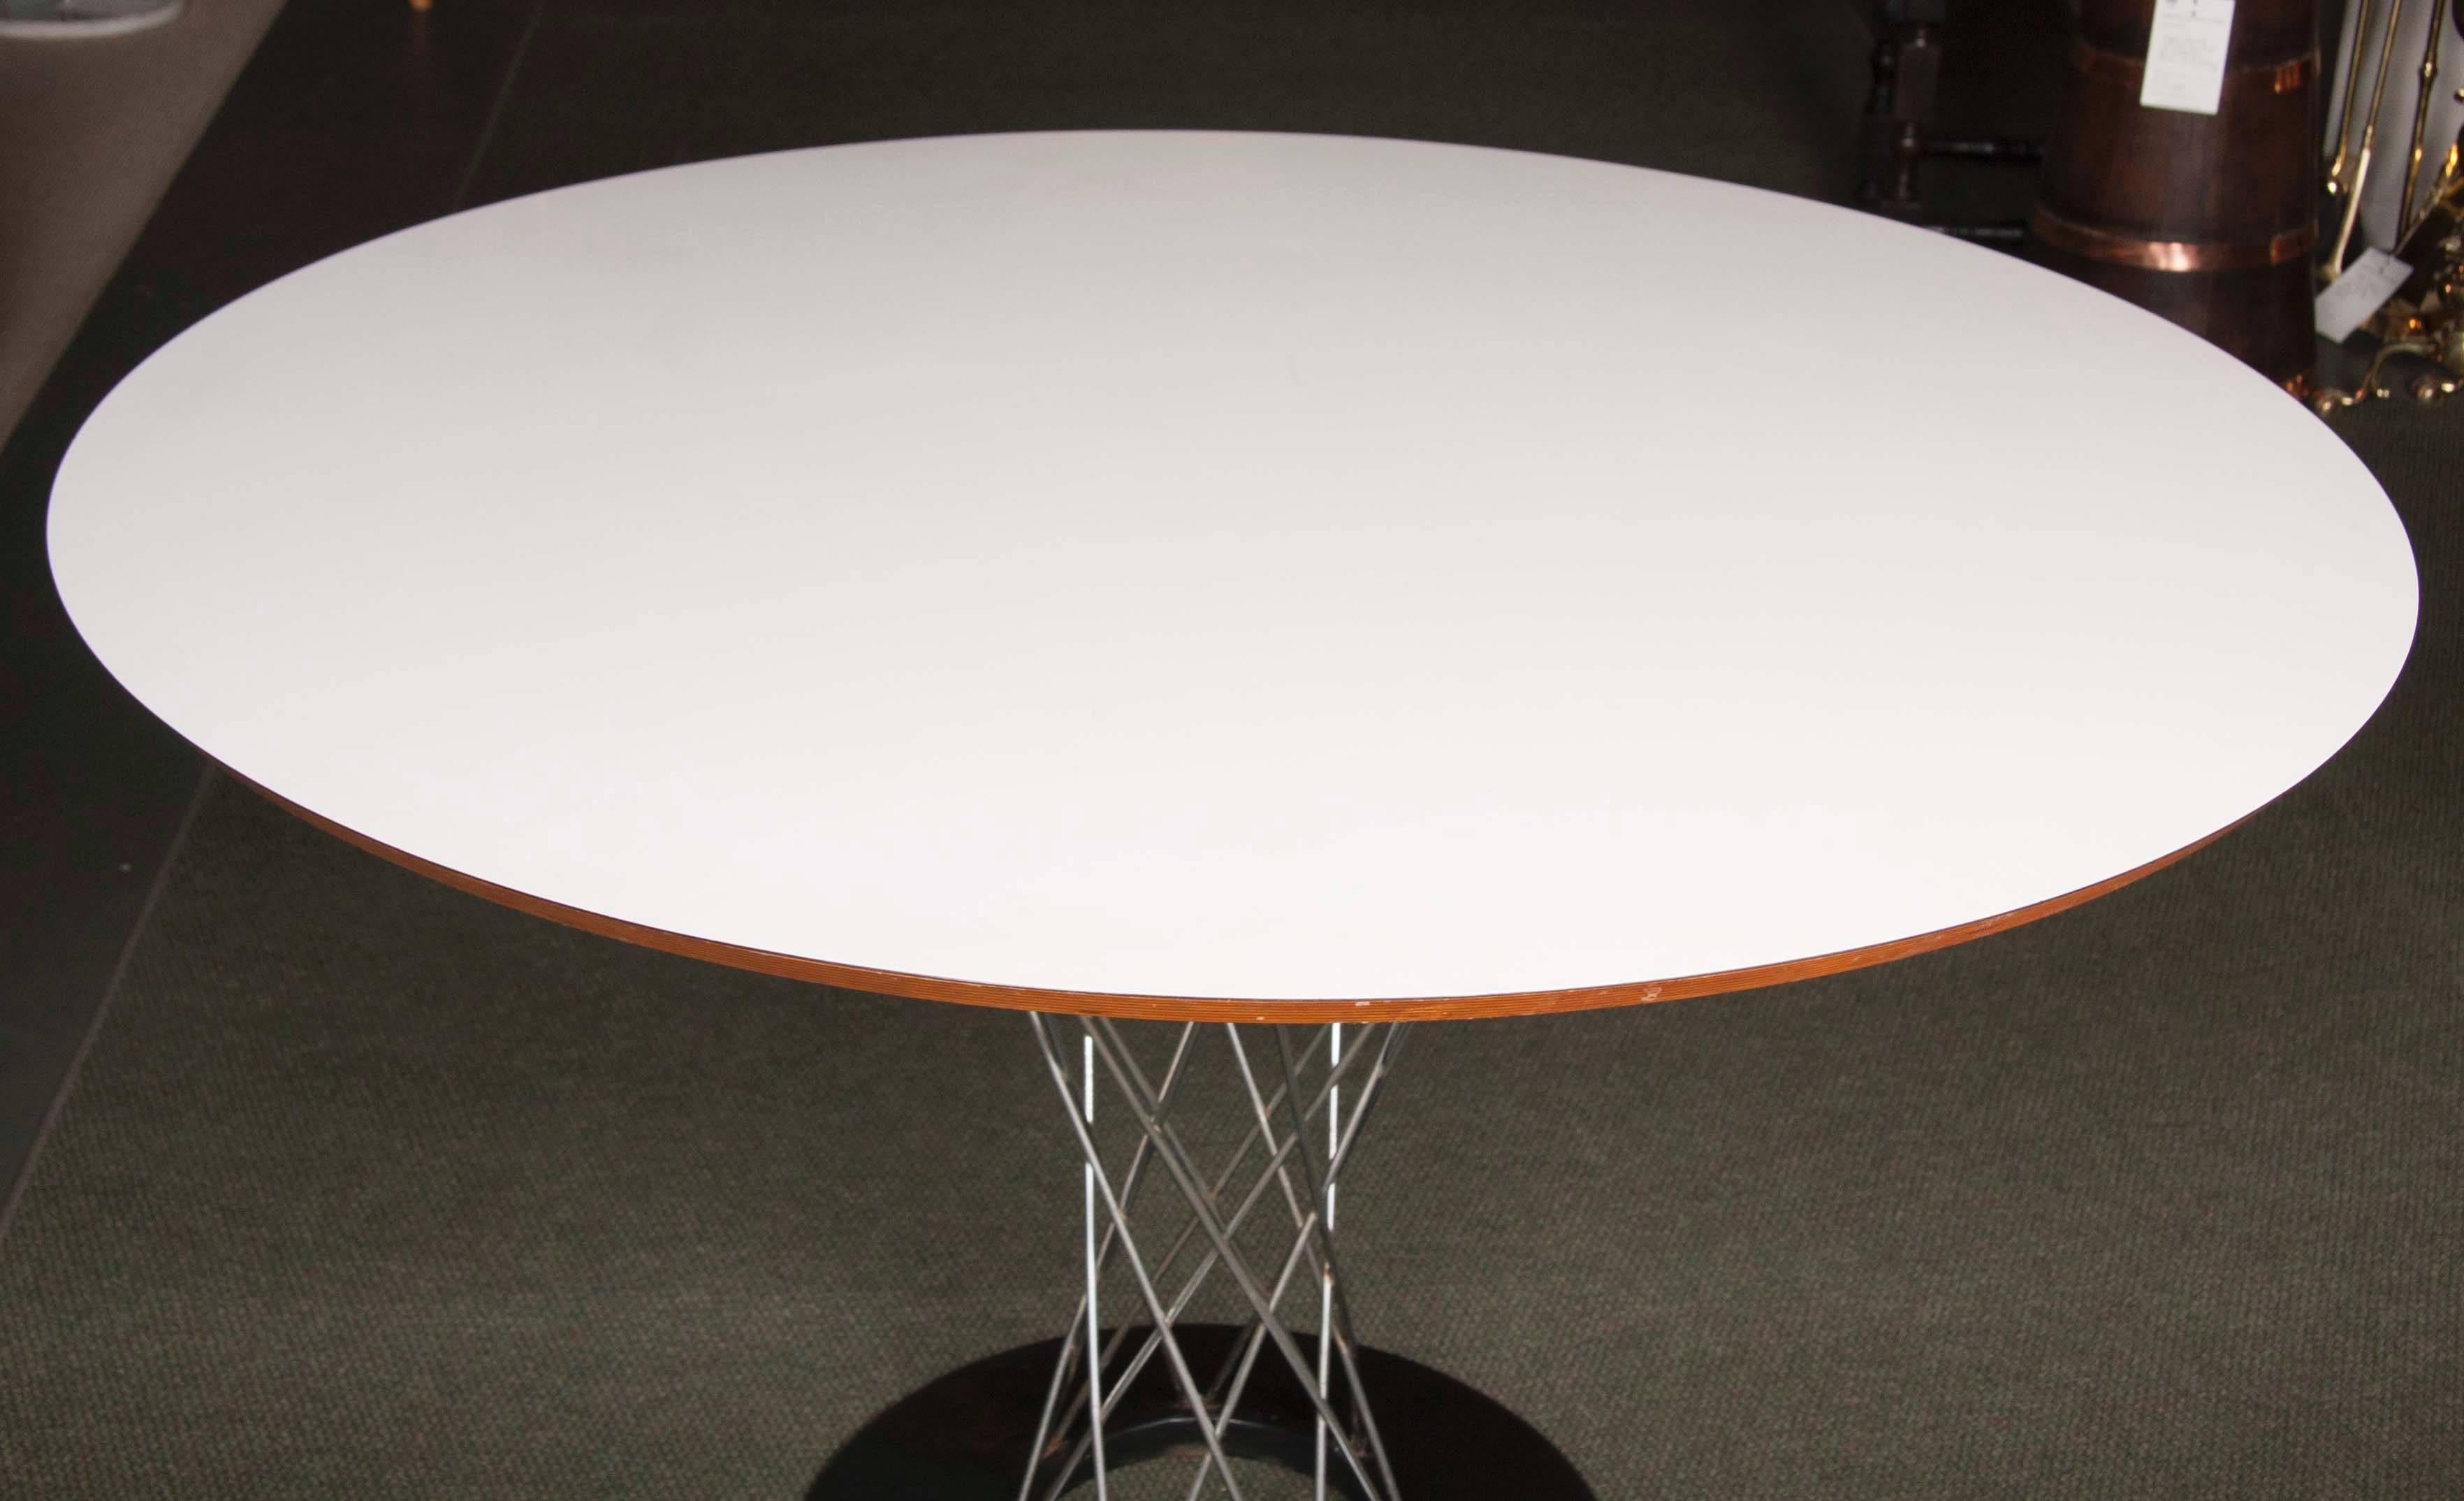 20th Century “Cyclone” Table by the Famed Mid-Century Designer Isamu Noguchi for Knoll